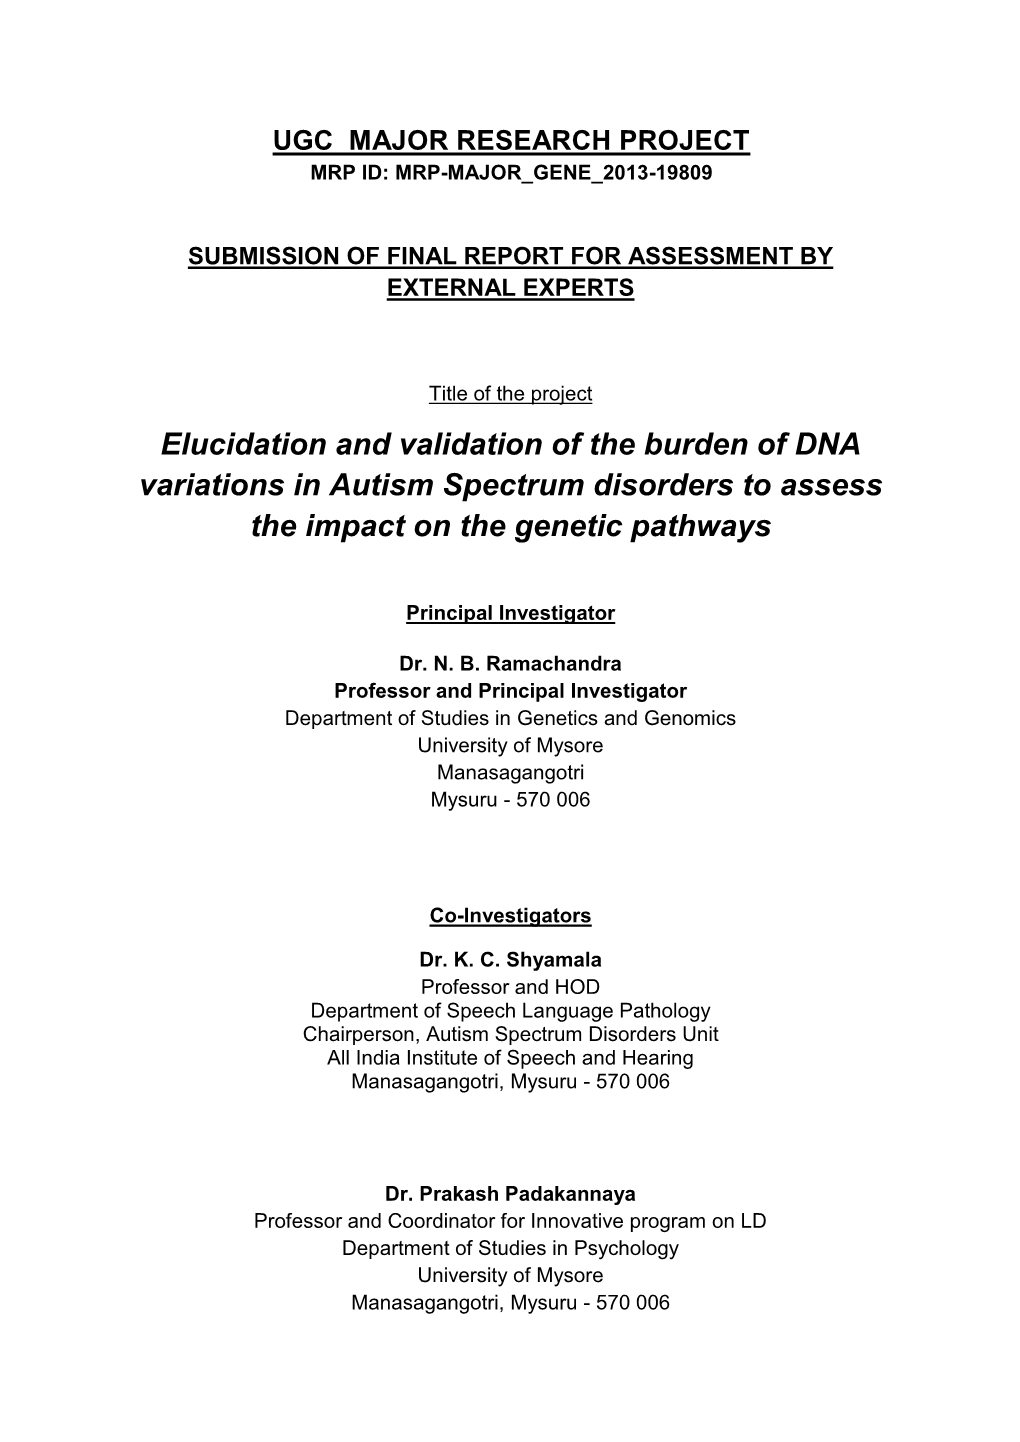 Elucidation and Validation of the Burden of DNA Variations in Autism Spectrum Disorders to Assess the Impact on the Genetic Pathways